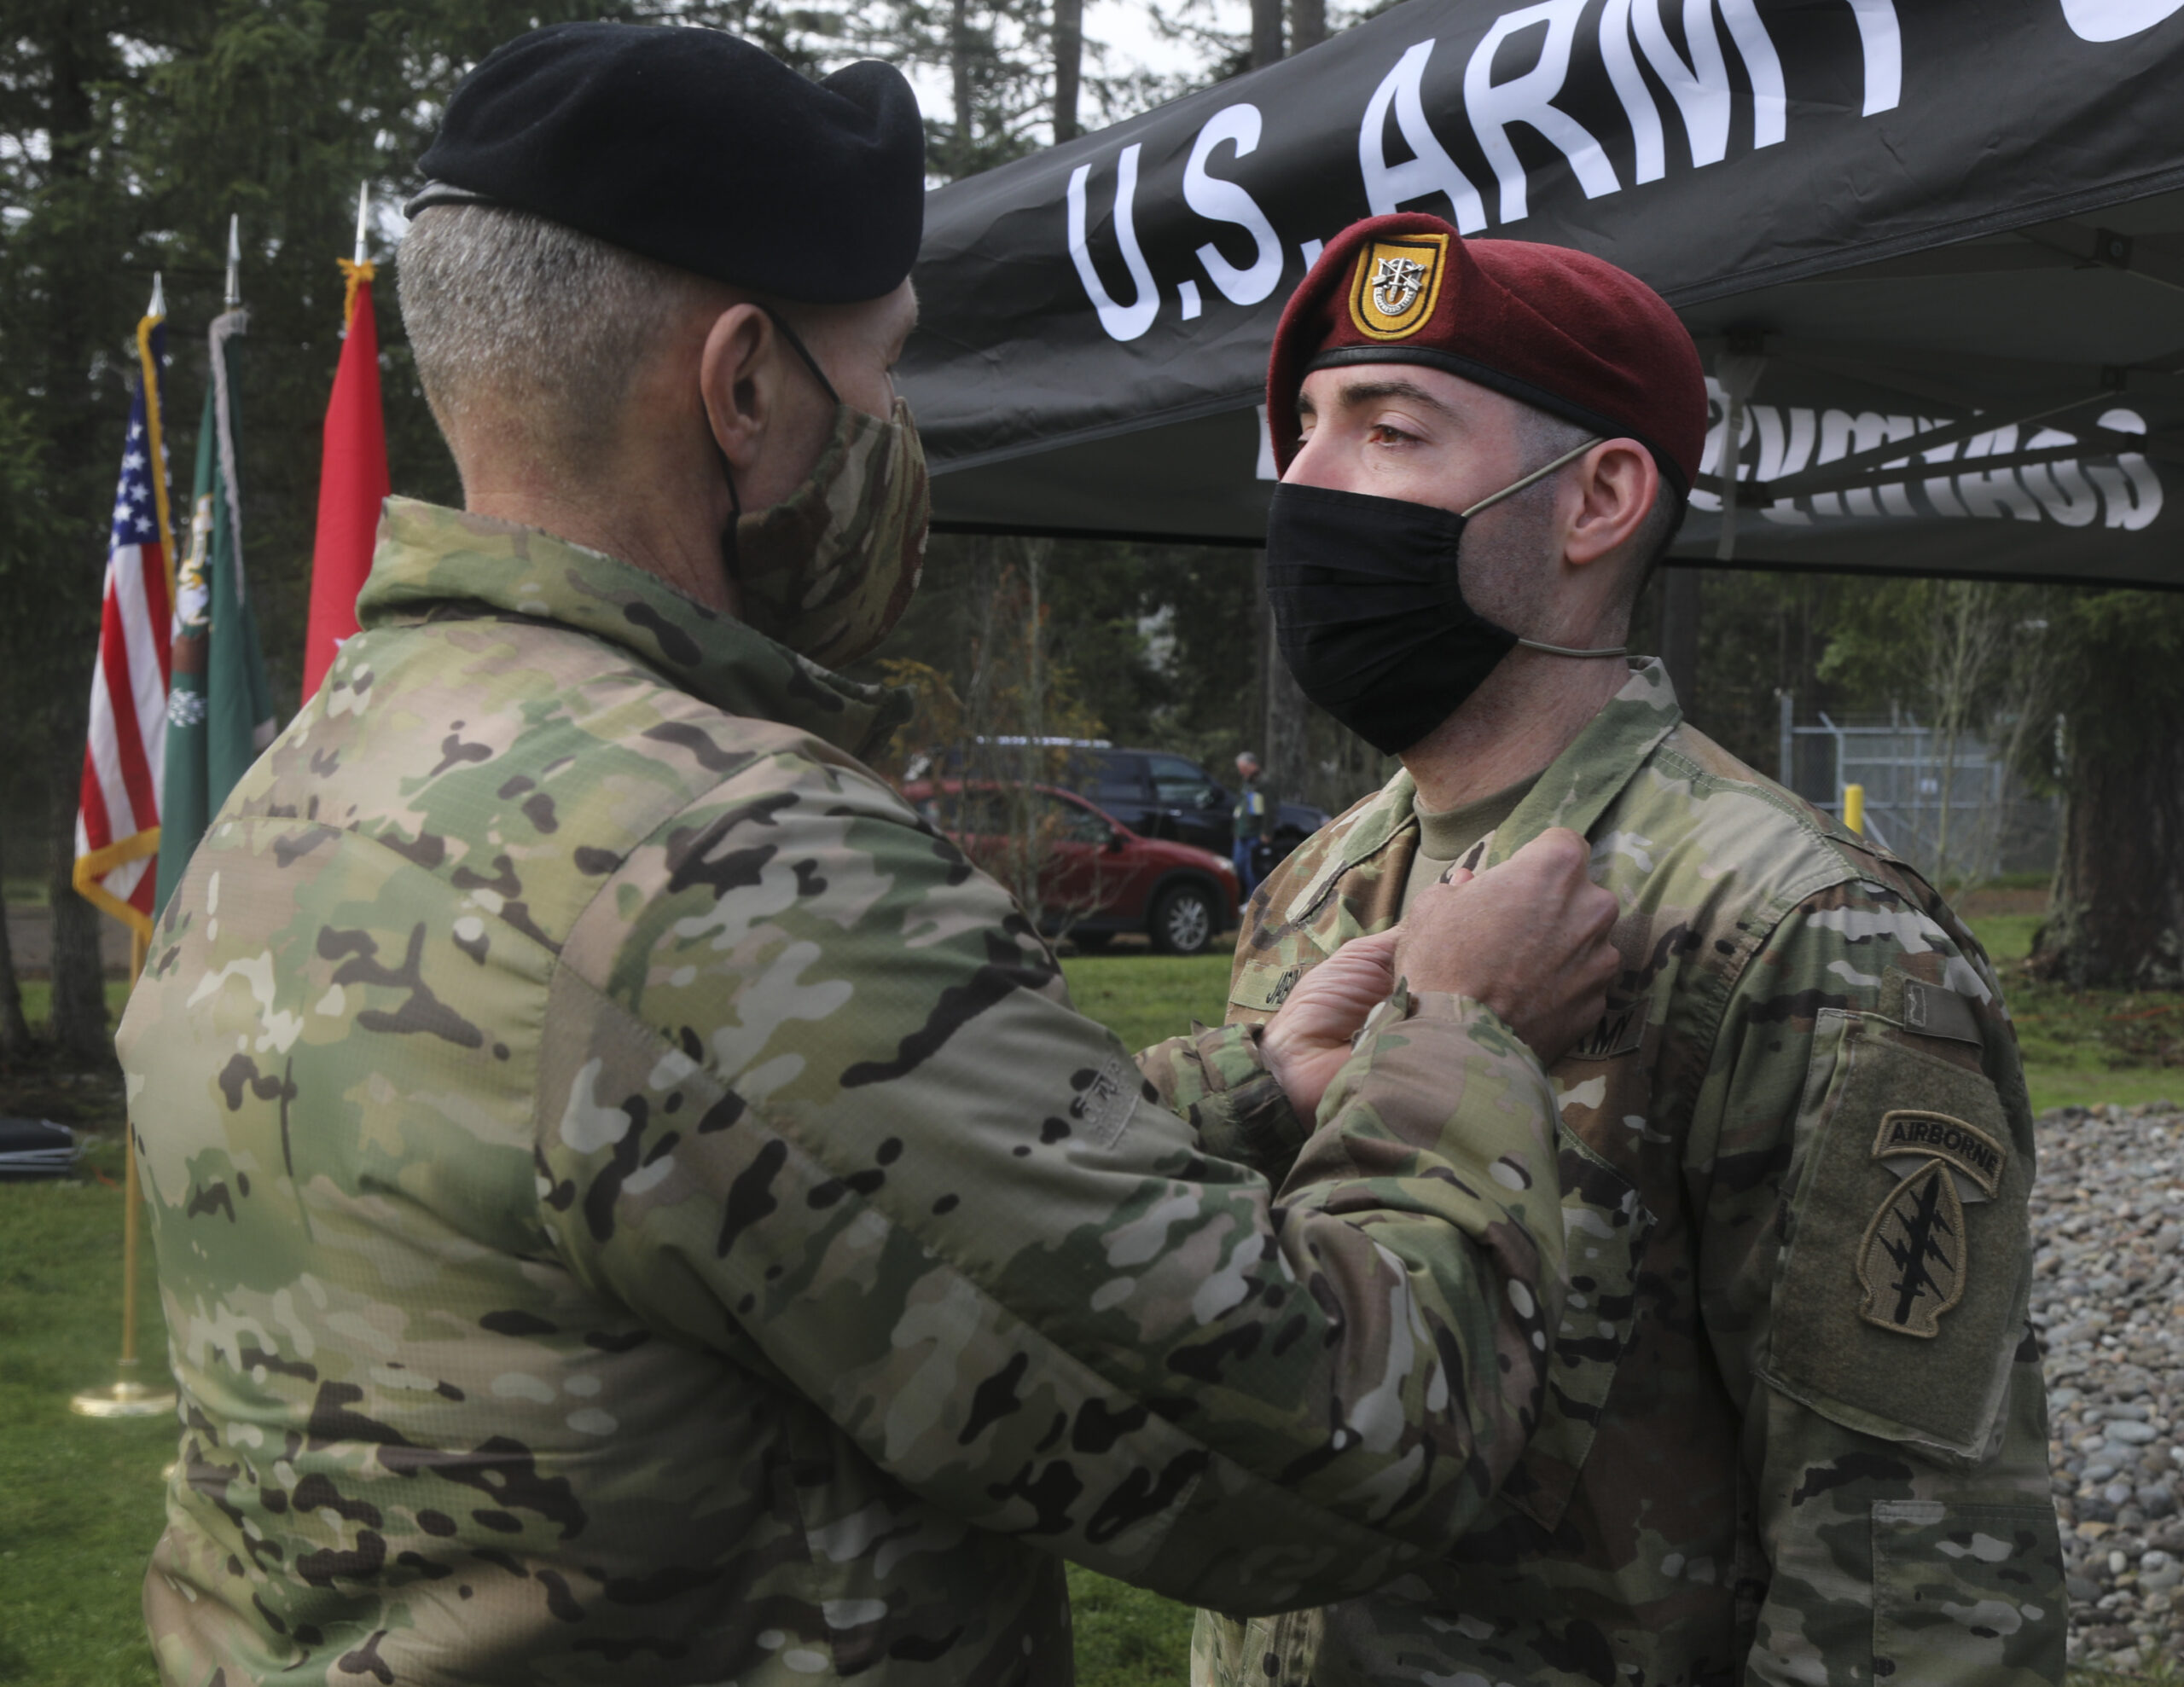 Lt. Gen. Randy A. George, commanding general, I Corps and Joint Base Lewis-McChord, presents the Soldier’s Medal to Sgt. Alexander Jabin, satellite operator/maintainer, 4th Battalion, 1st Special Forces Group (Airborne), Dec. 1, 2020, at the Master Sgt. Mark W. Coleman Compound. Jabin was awarded for rescuing a driver from a burning vehicle following a collision in March of 2019.

(Photo by Spc. Joshua Belser, Combat Documentation/Production Specialist, Public Affairs, 1st SFG (A))